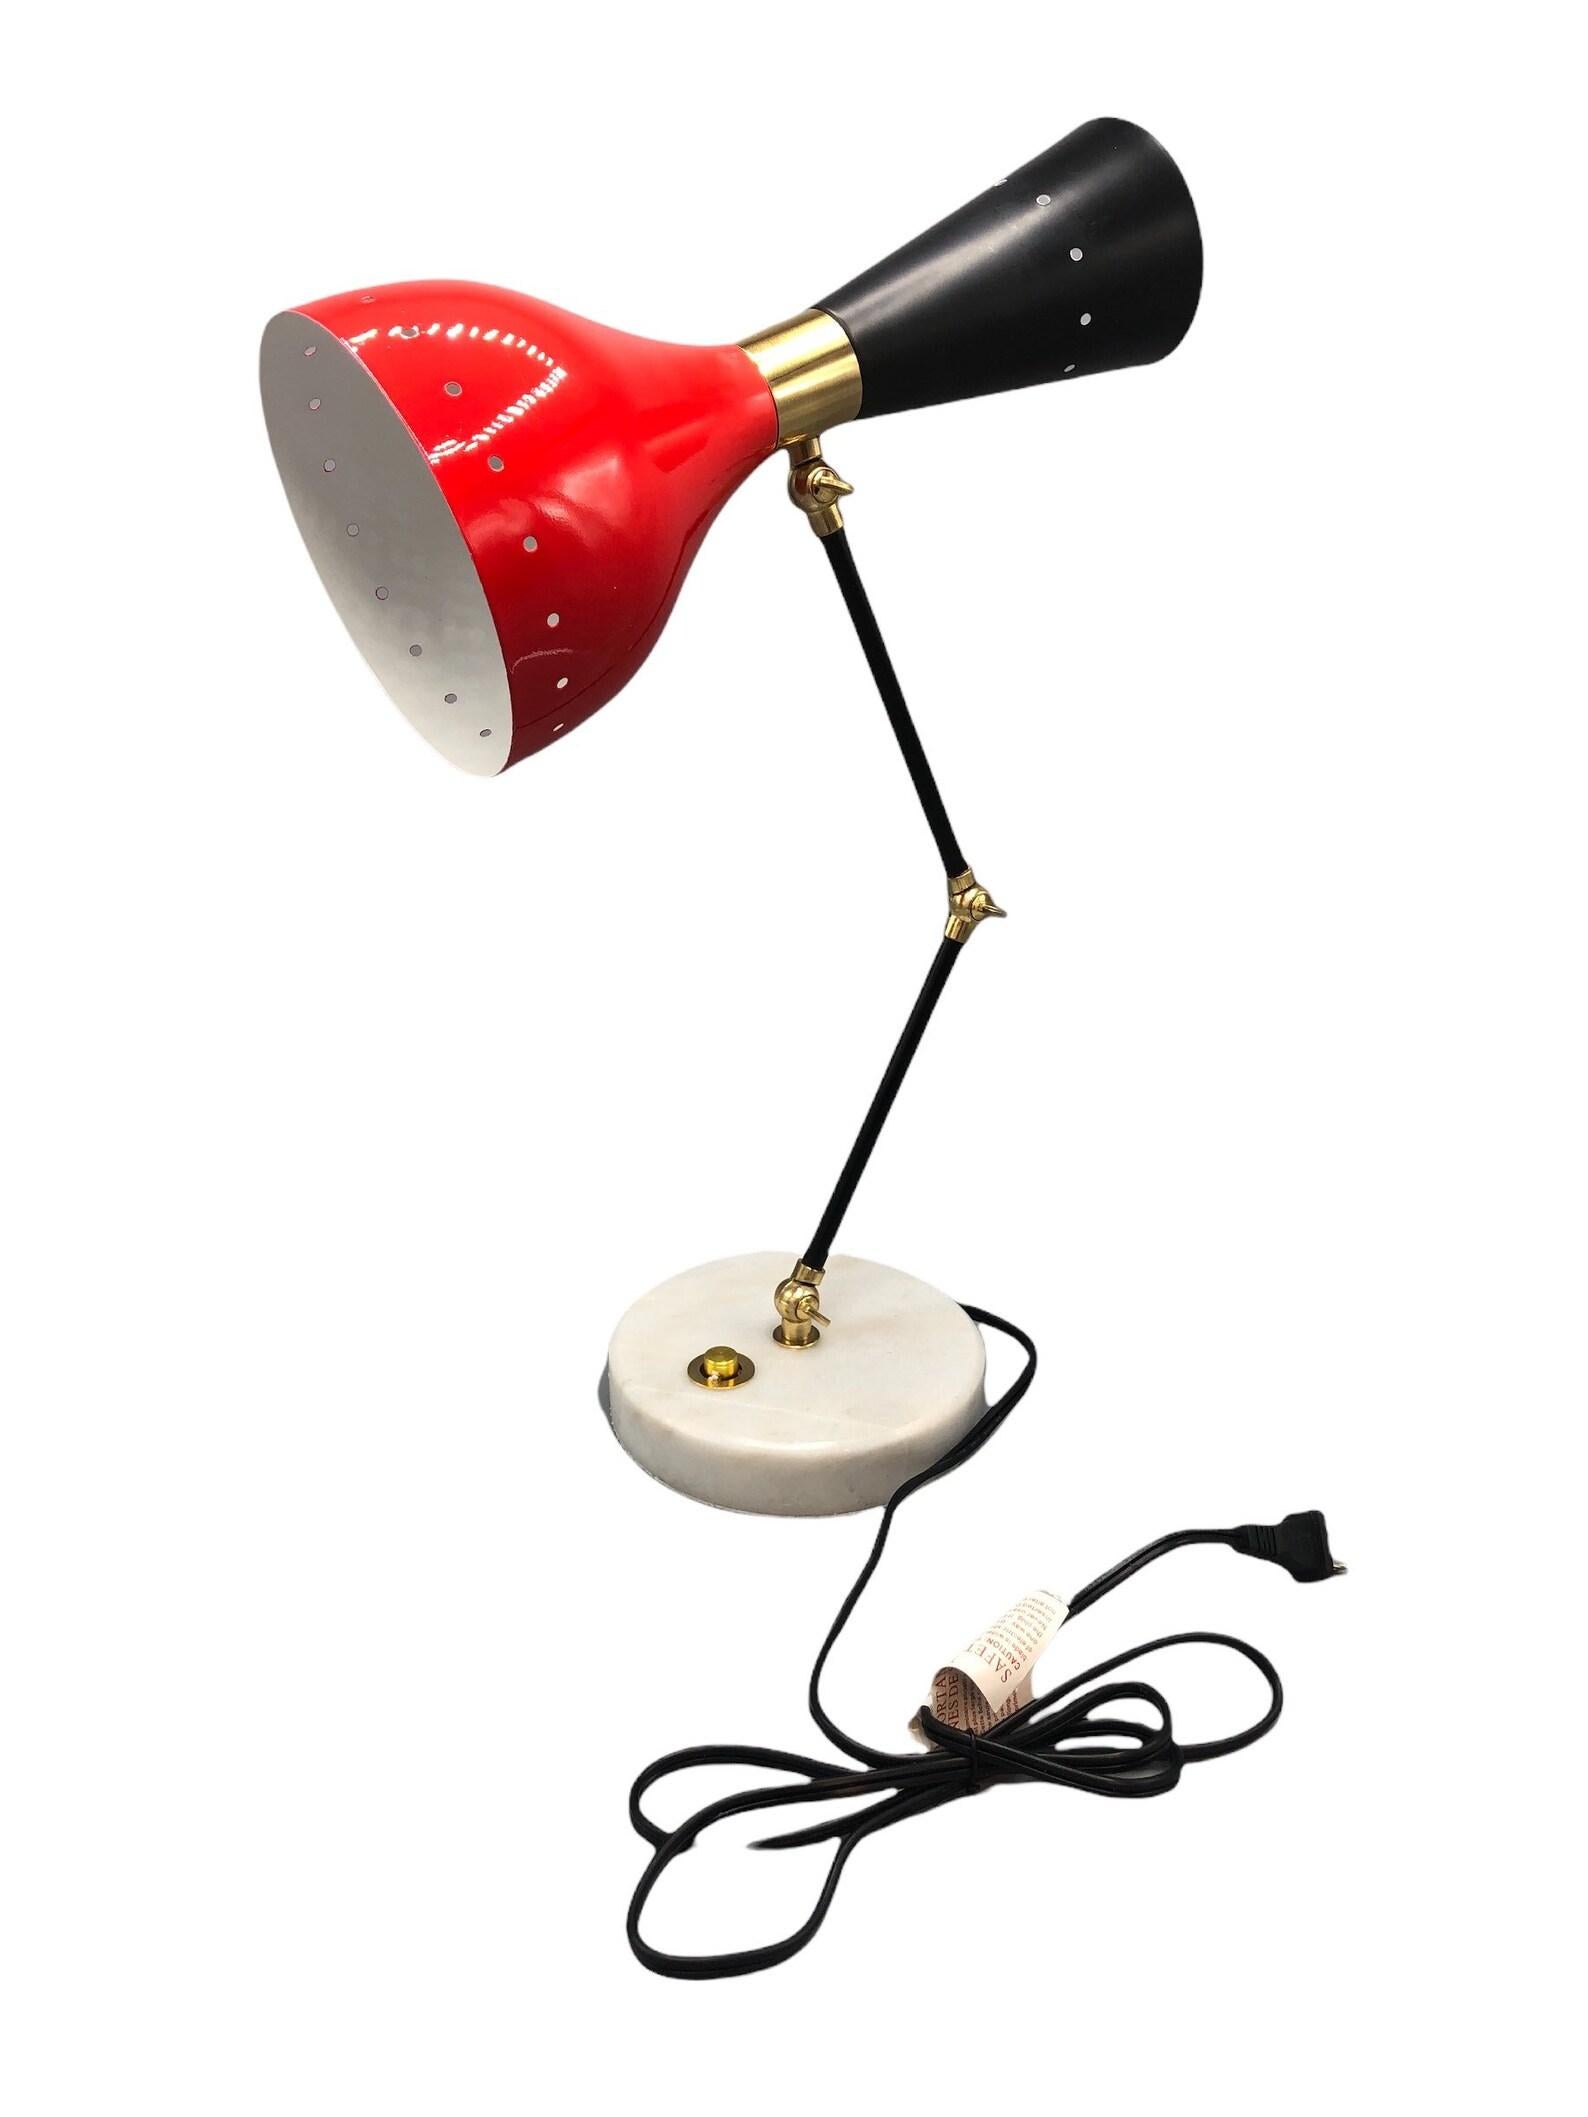 Modern Brass Adjustable Desk Lamp with Marble Base Italian Style, Red Shade In Distressed Condition For Sale In Hudson, NY